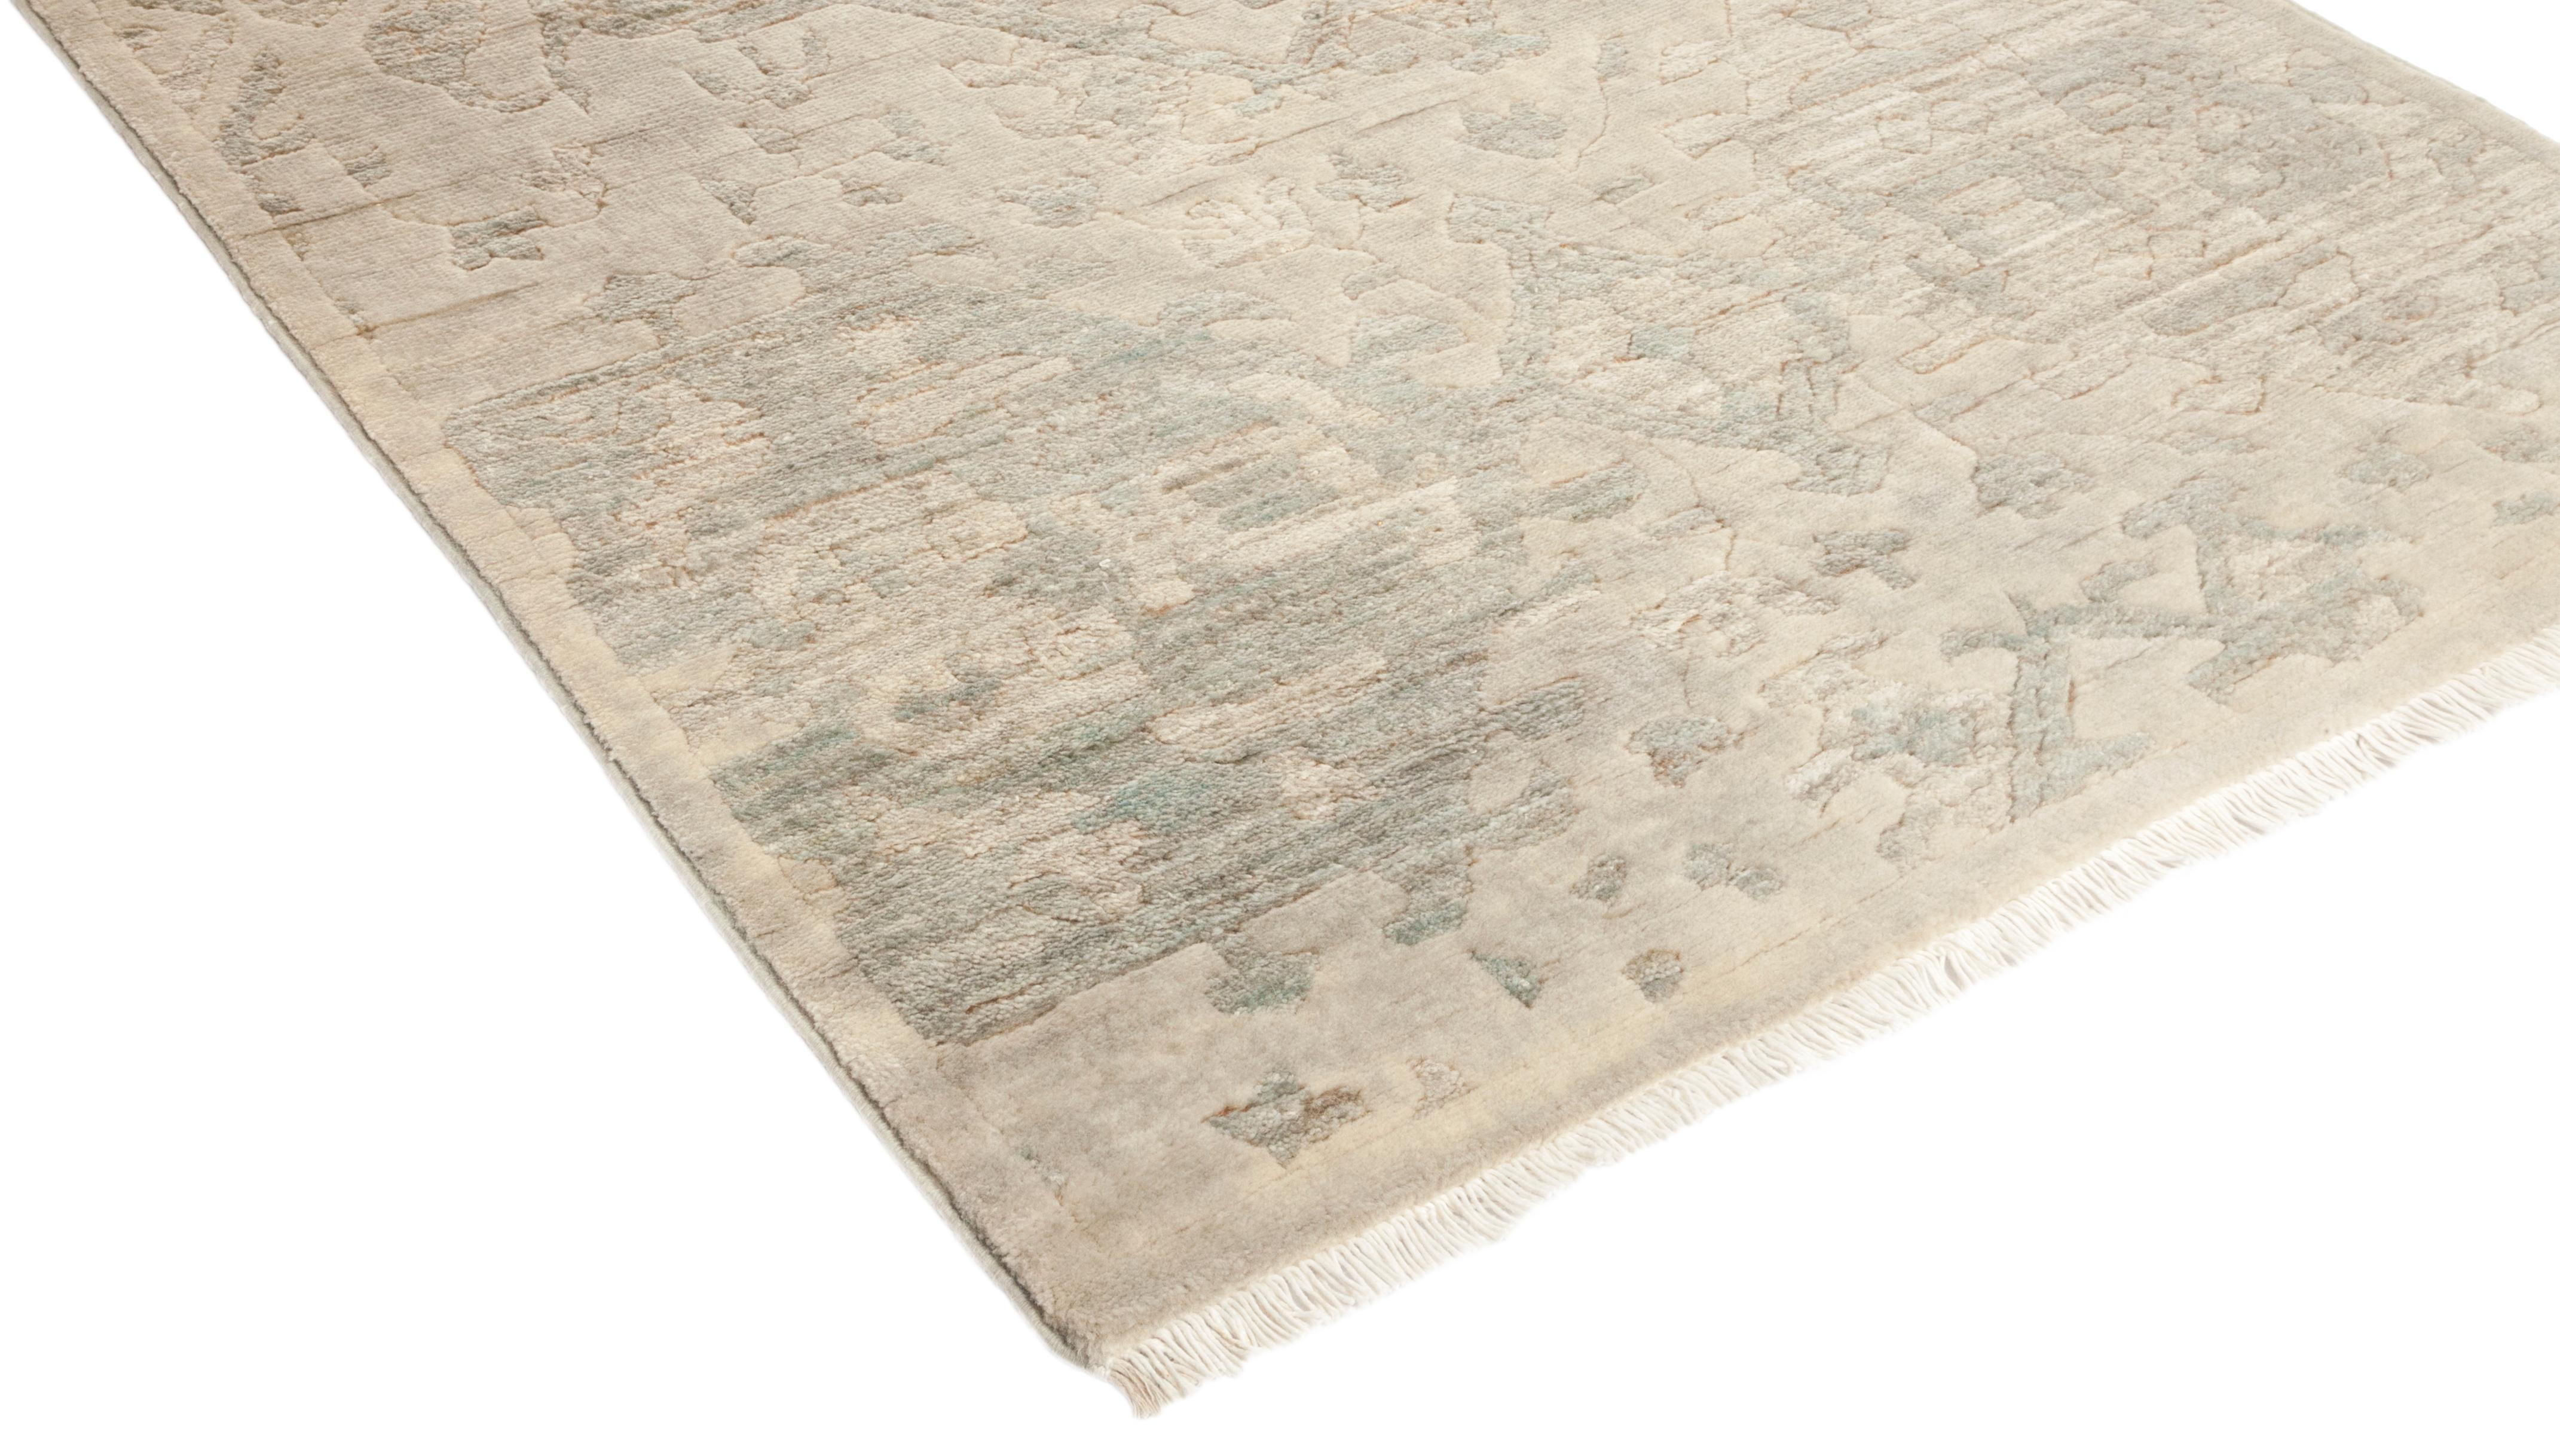 Color: Beige - Made in: Pakistan. 100% wool. The Colorful collection epitomizes classic with a twist: traditional patterns overdyed in brilliant color. Each hand knotted rug is washed in a 100%-natural botanical dye that reveals hidden nuances in